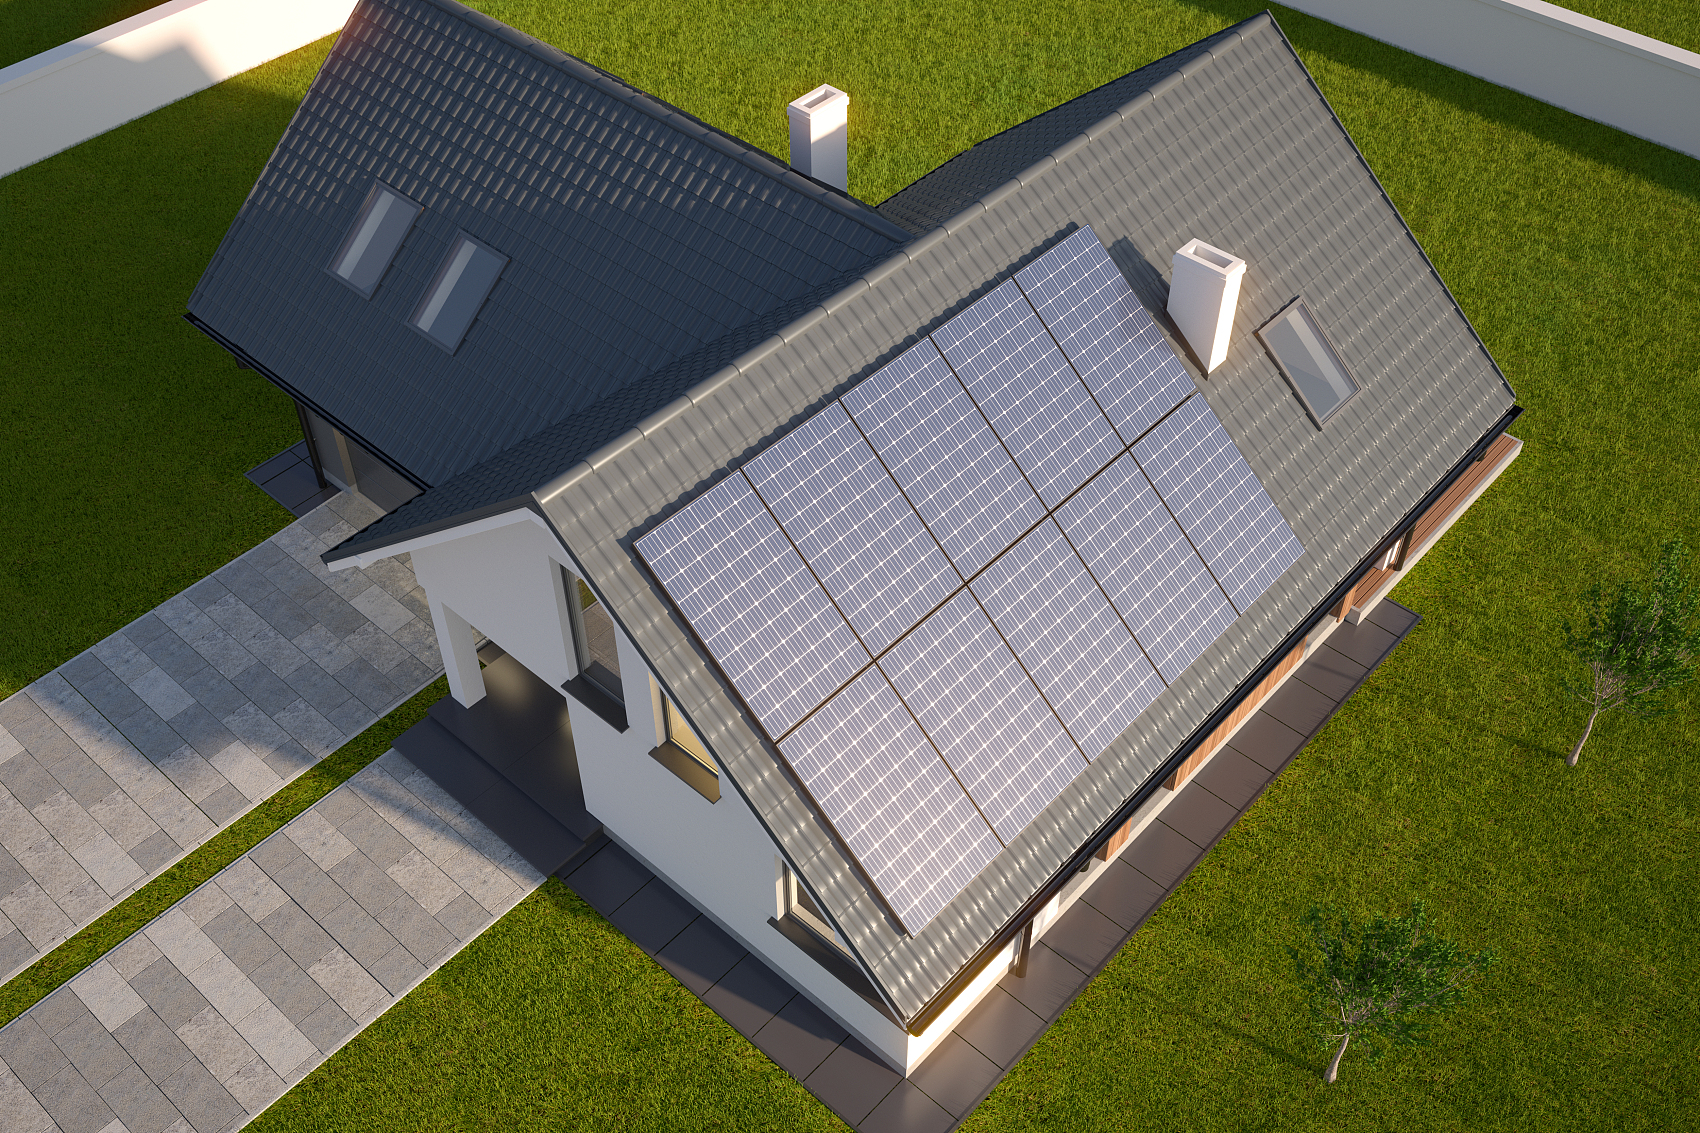 Sharing strategies for creating net-zero emission buildings